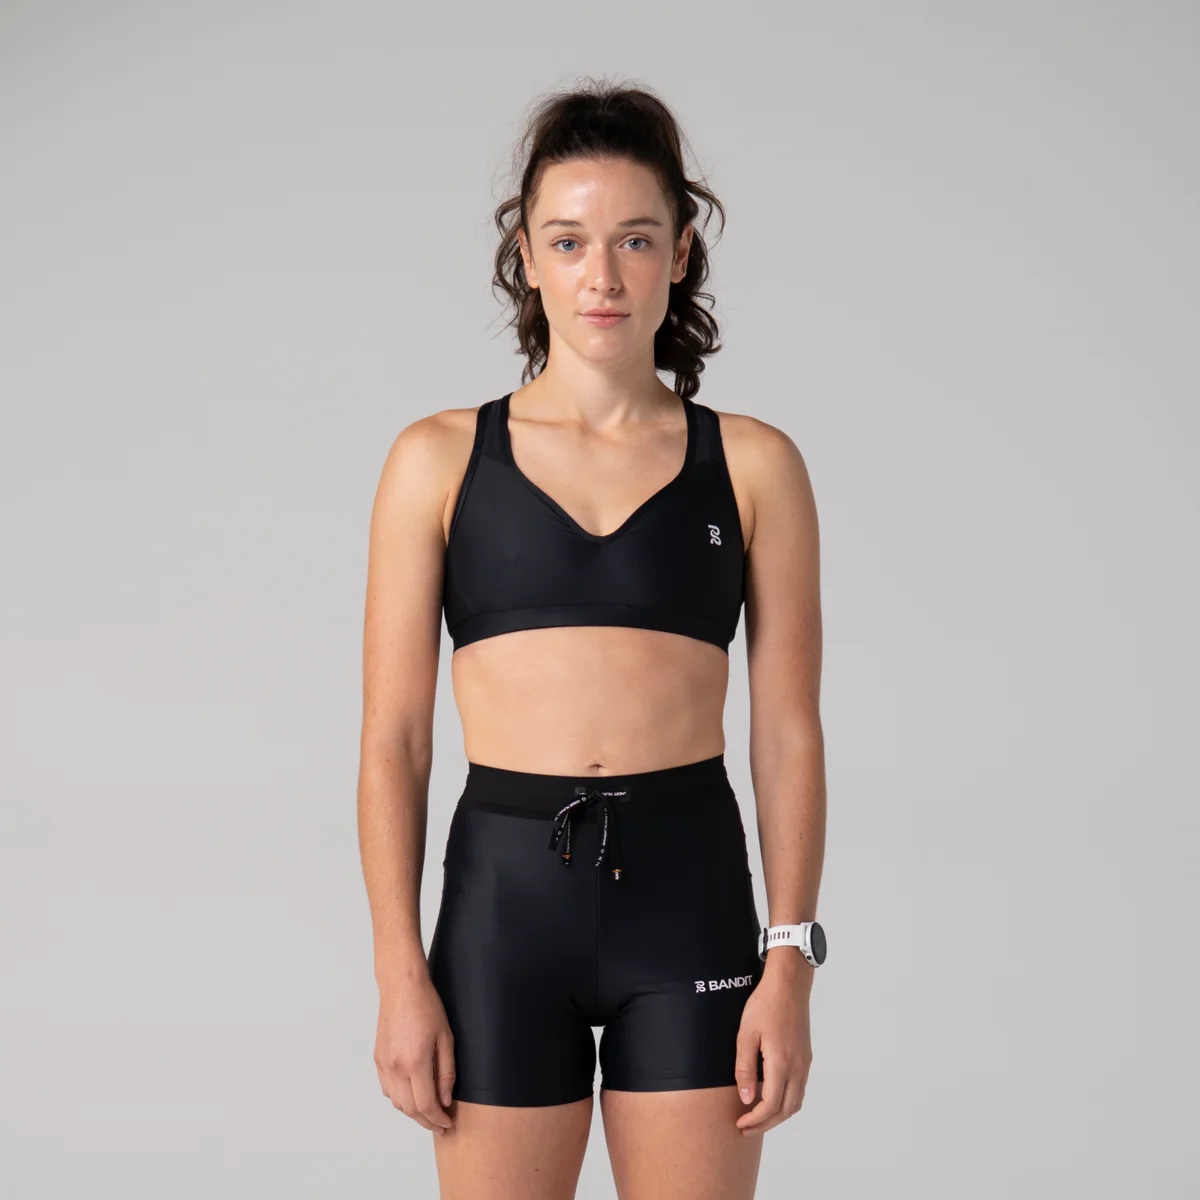 Superbeam Sweetheart Sports Bra by Bandit, sports bra for small chest